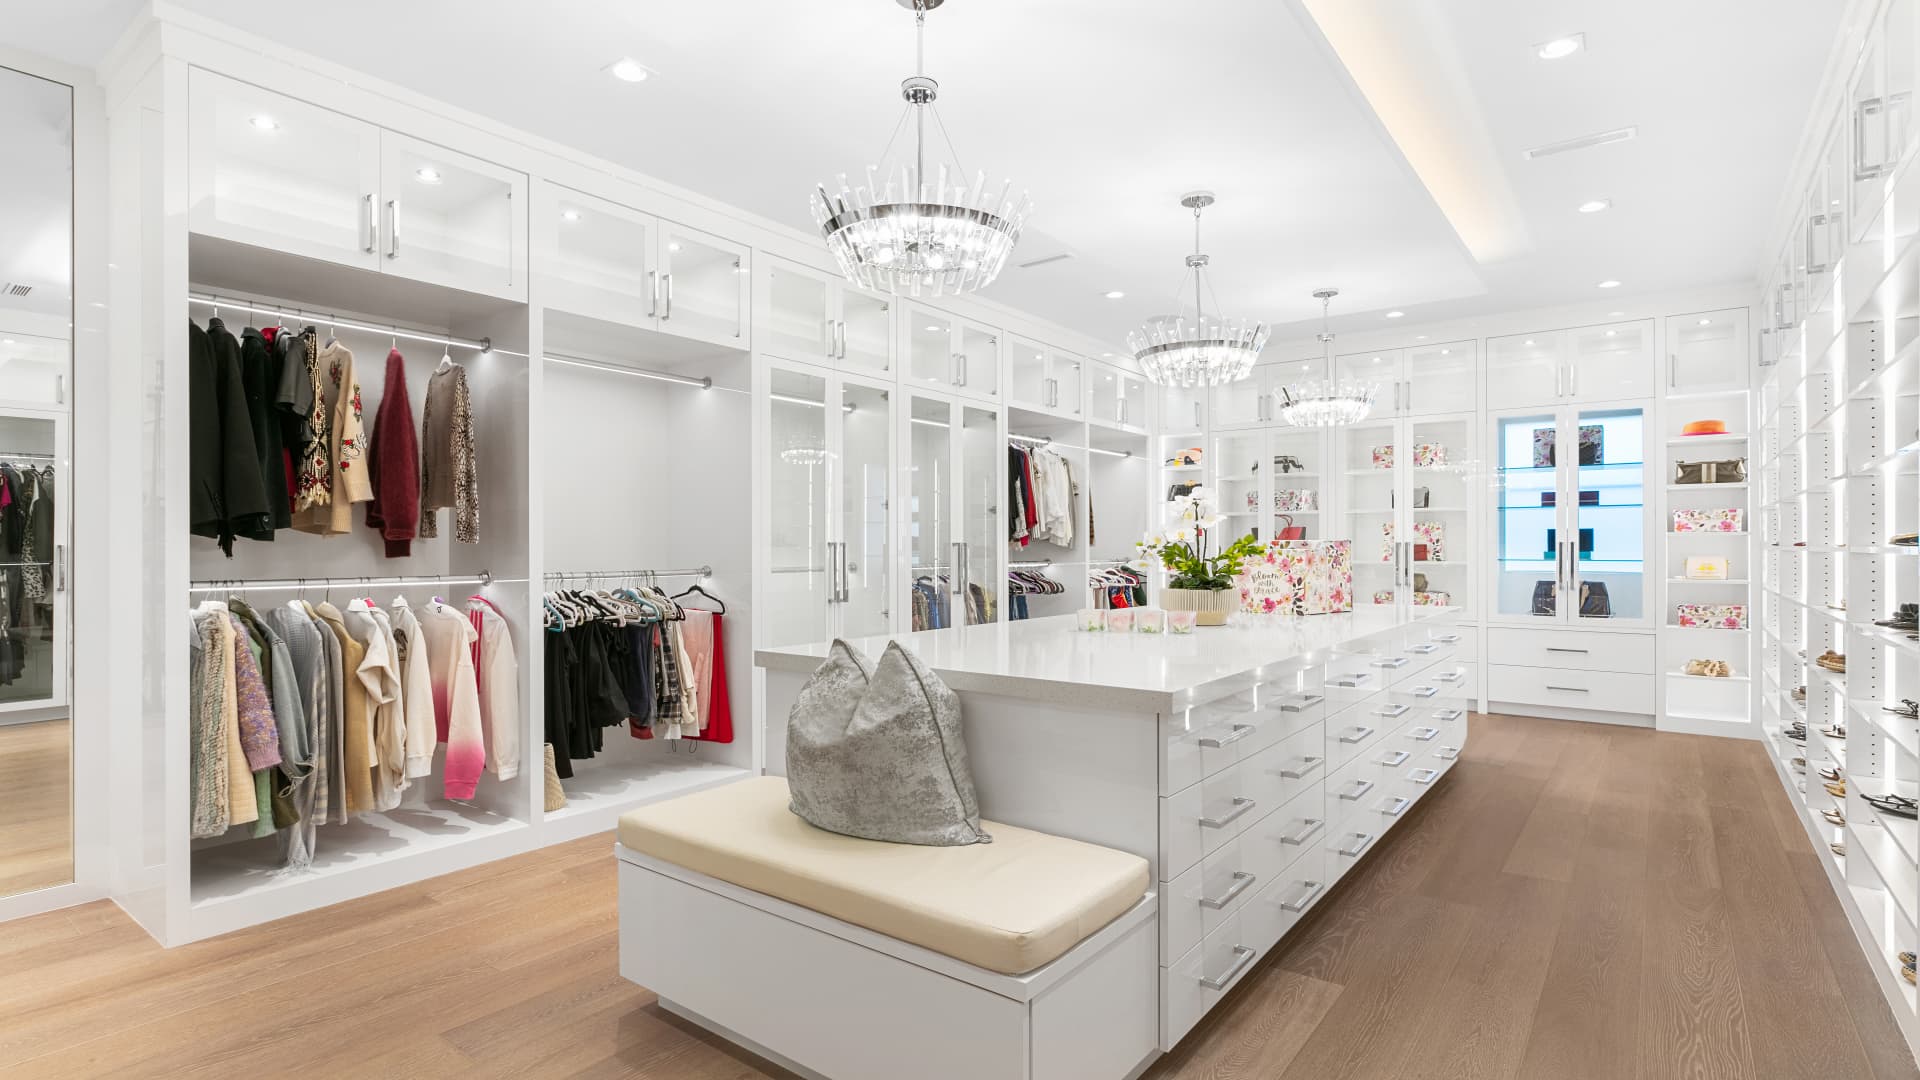 One of two walk-in closets in the home's primary suite.